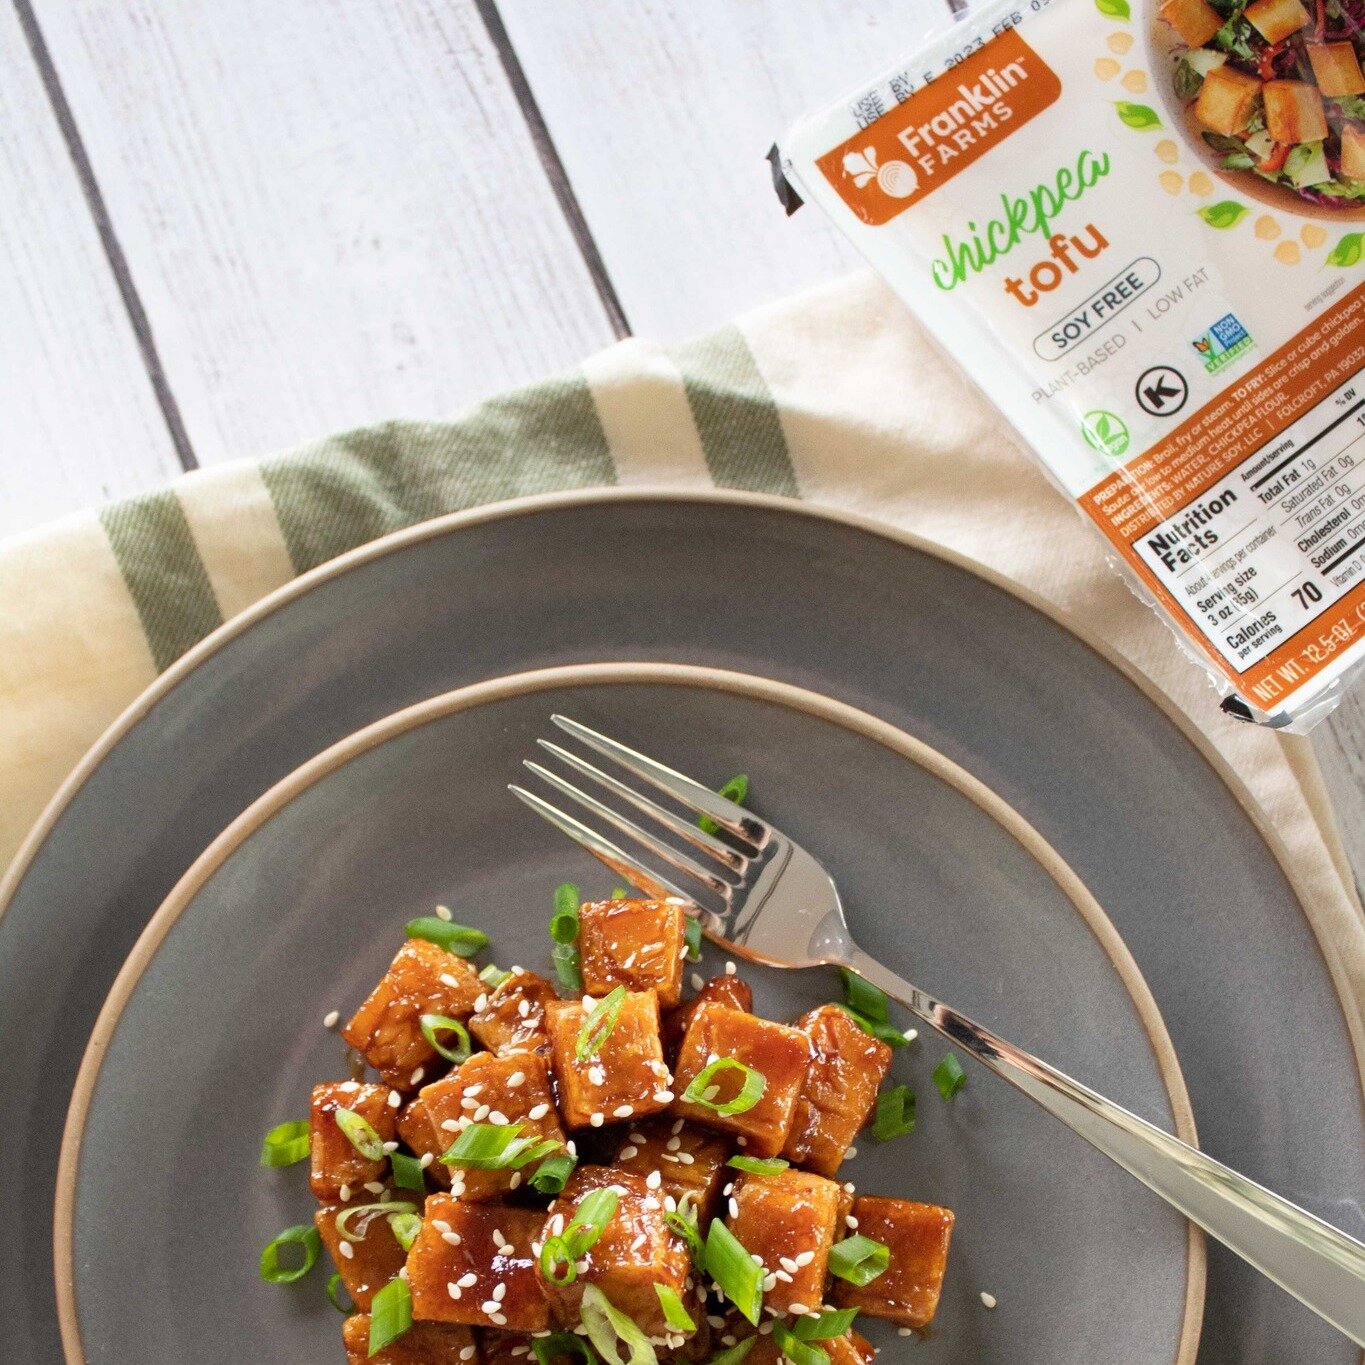 The perfect combination of sweet &amp; spicy in this Chickpea Tofu recipe. 🌿Find the recipe below! 

Sweet &amp; Spicy Chickpea Tofu⁠
⁠
Sauce ⁠
&bull;1 Tablespoon of Soy Sauce⁠
&bull;3 Tablespoons of Maple Syrup⁠
&bull;1 Teaspoon of Sriracha ⁠
&bull